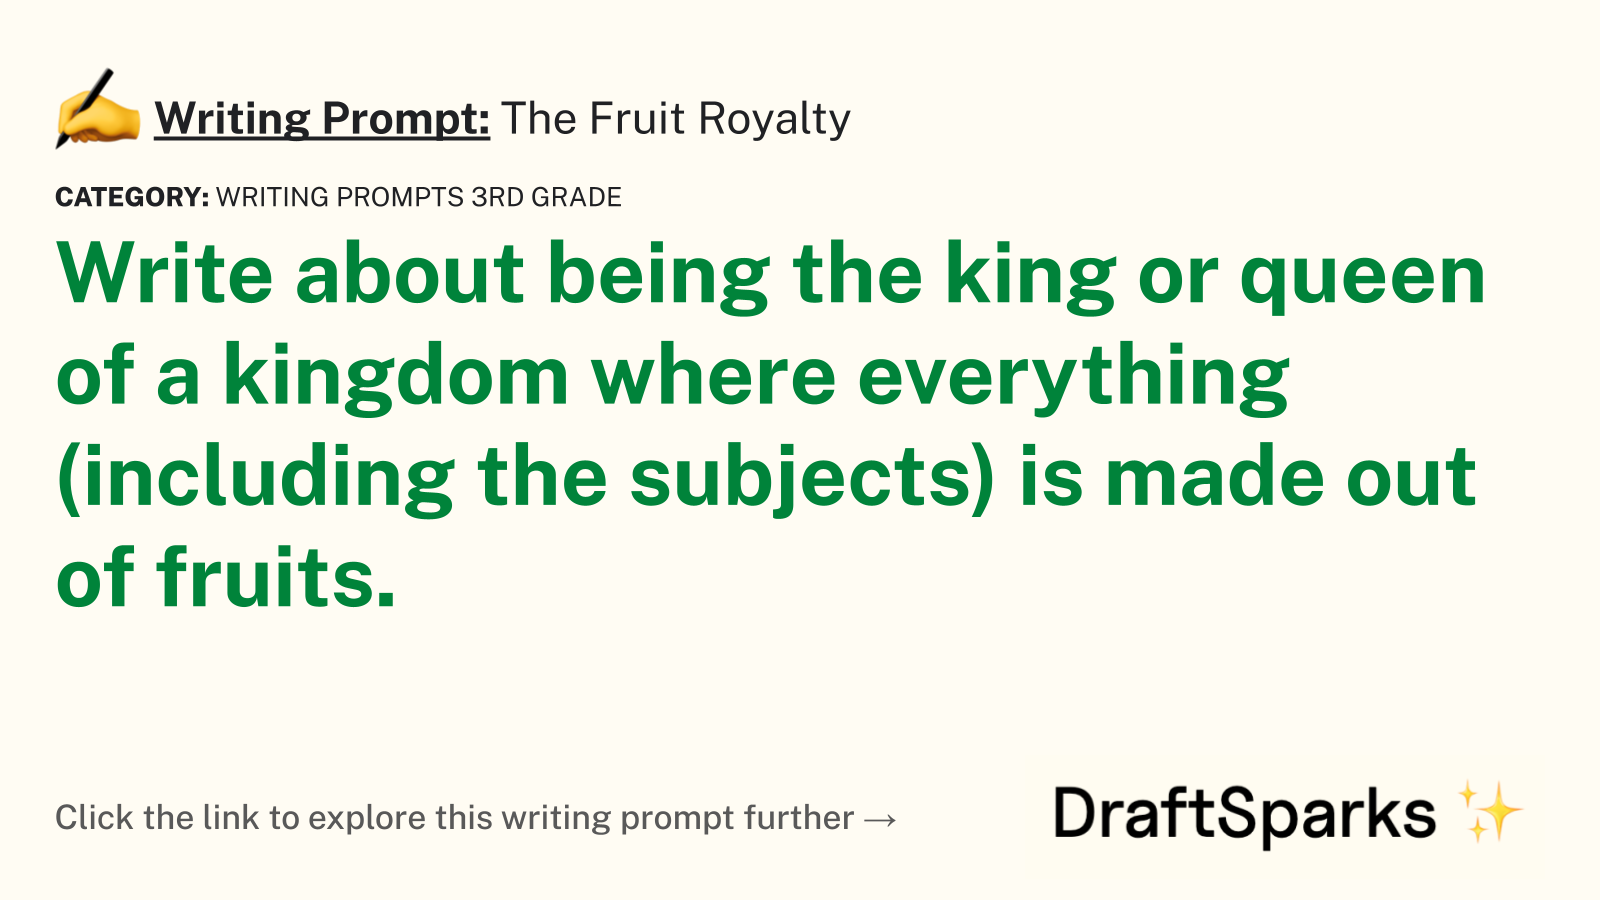 The Fruit Royalty